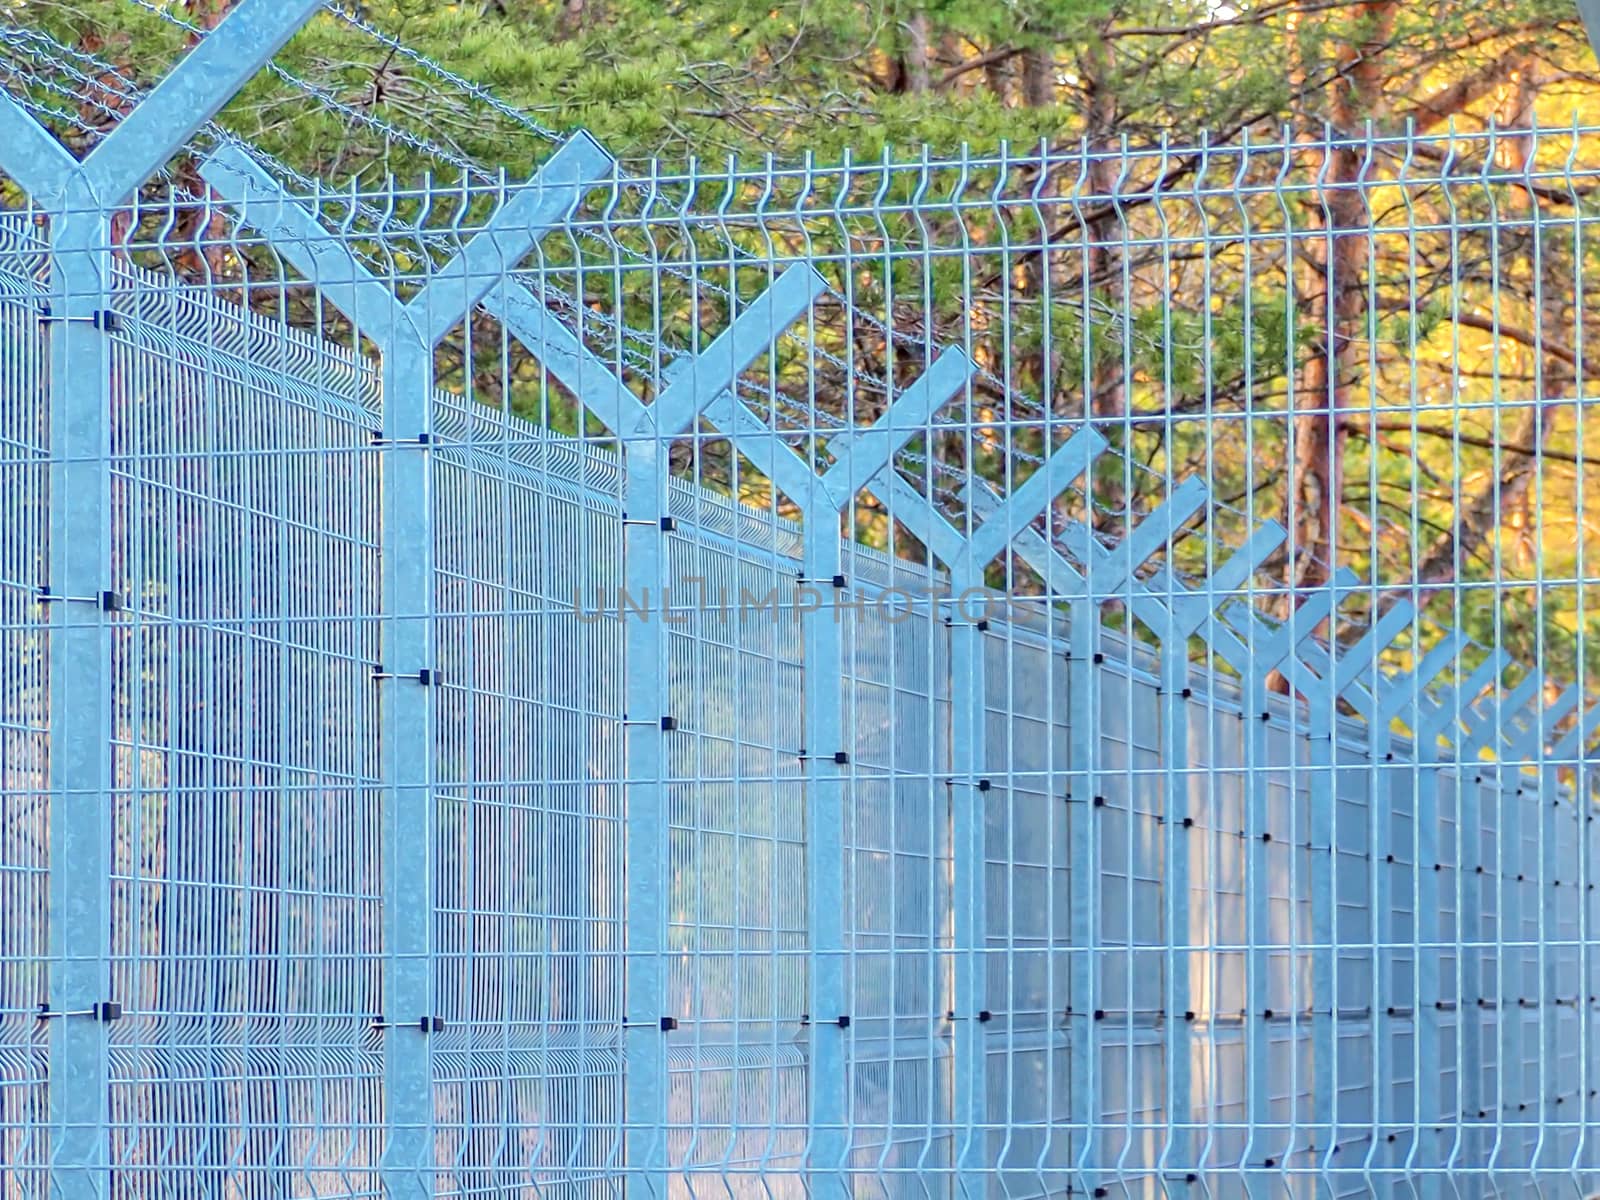 Selective focus. Security Fence In Prison. Lost freedom behind barbed wire. Old rusty barbed wire in the forest close up. Private property. Blue sky on background